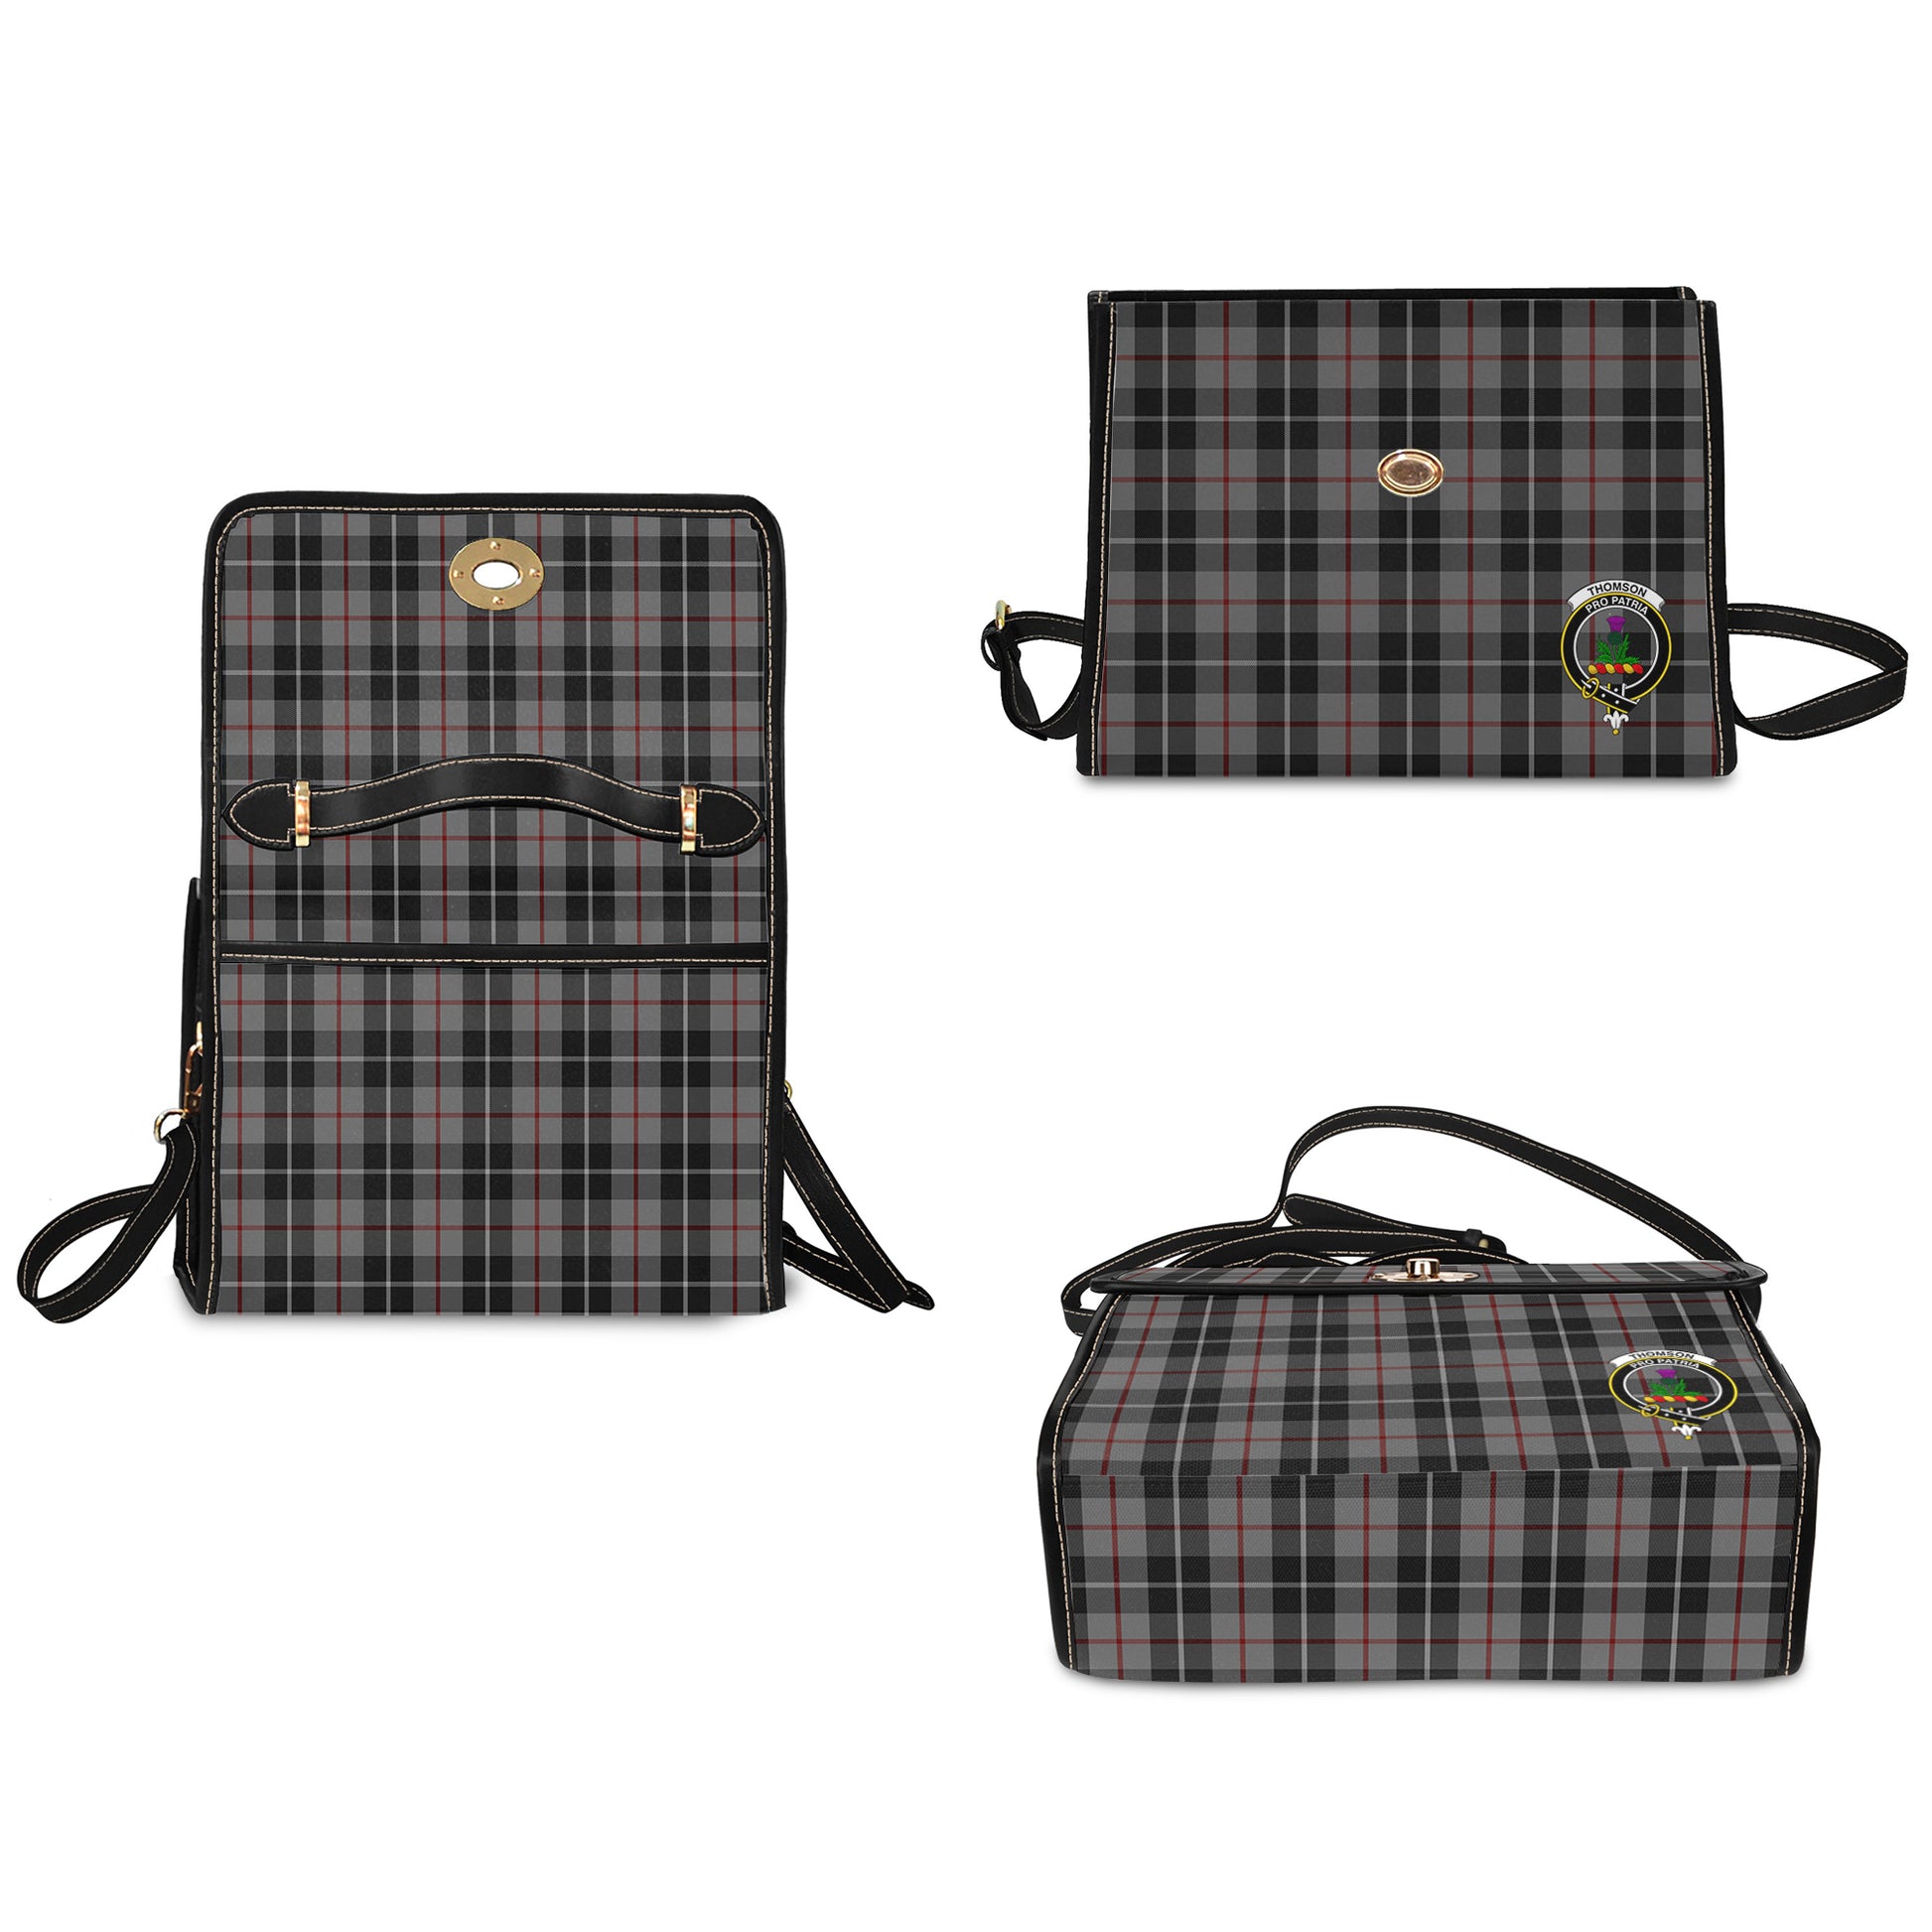 thompson-grey-tartan-leather-strap-waterproof-canvas-bag-with-family-crest